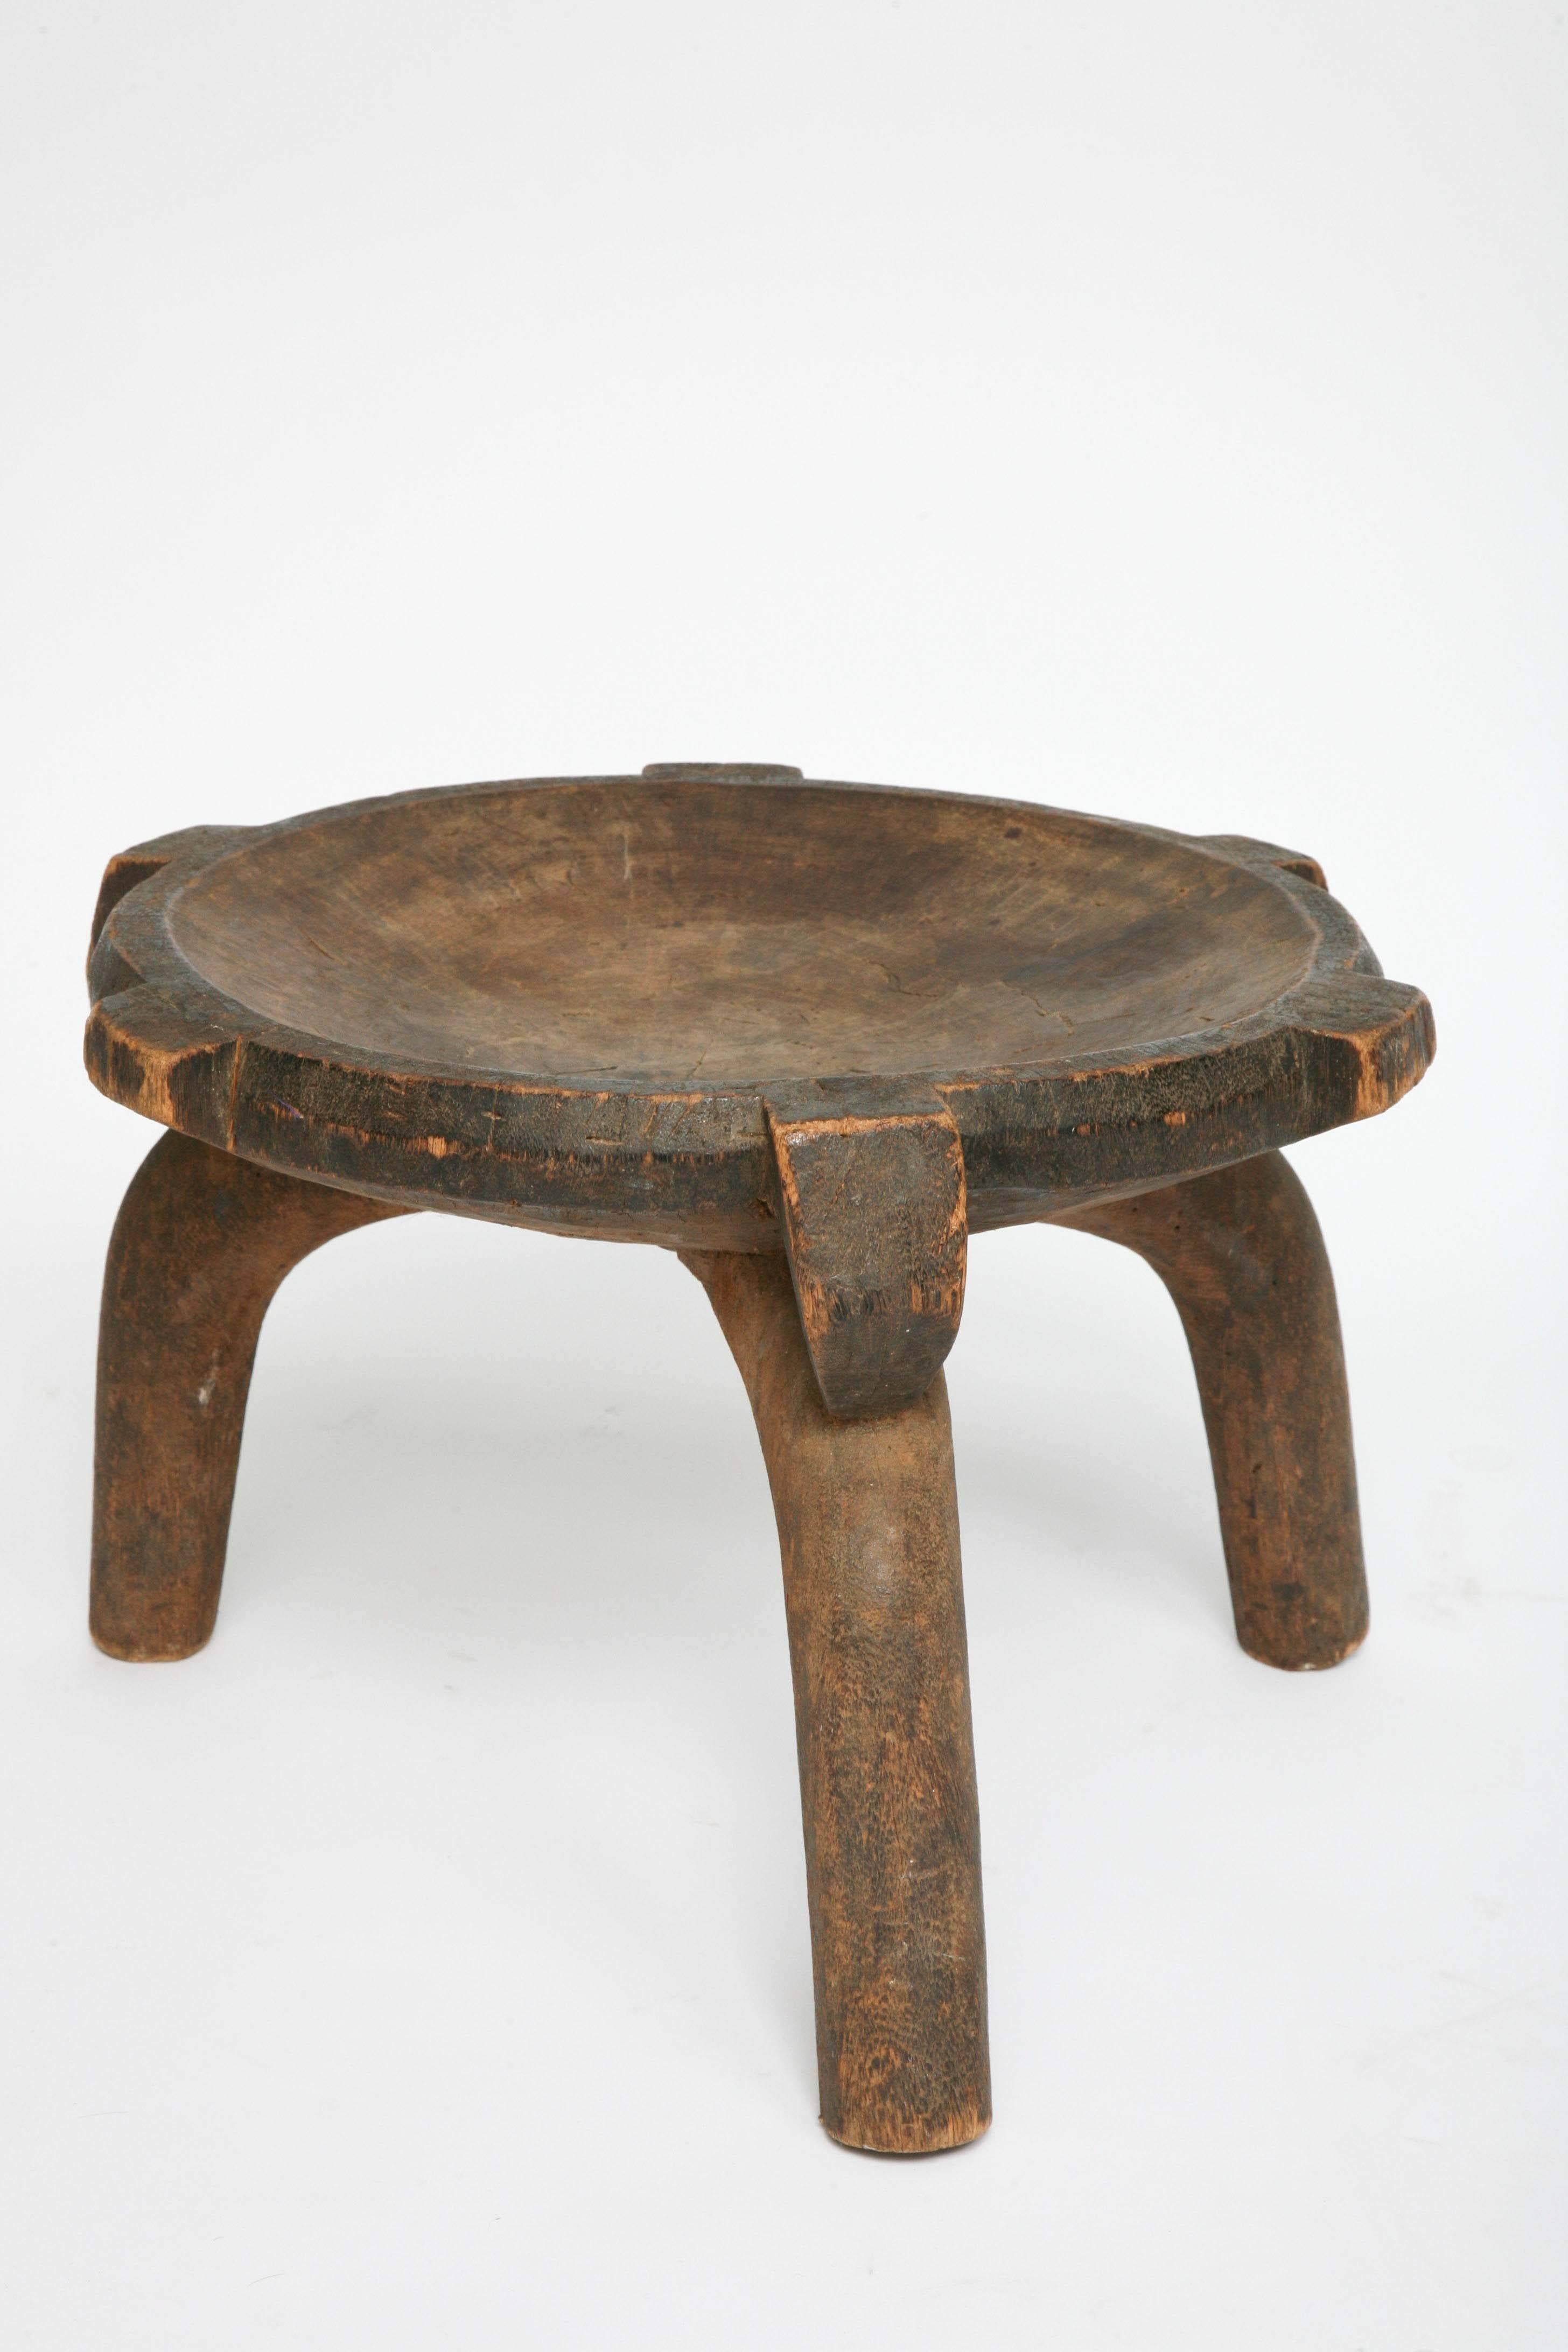 Tribal Three African Stools, Ethiopian, Hand-Carved, with Distinct Differences